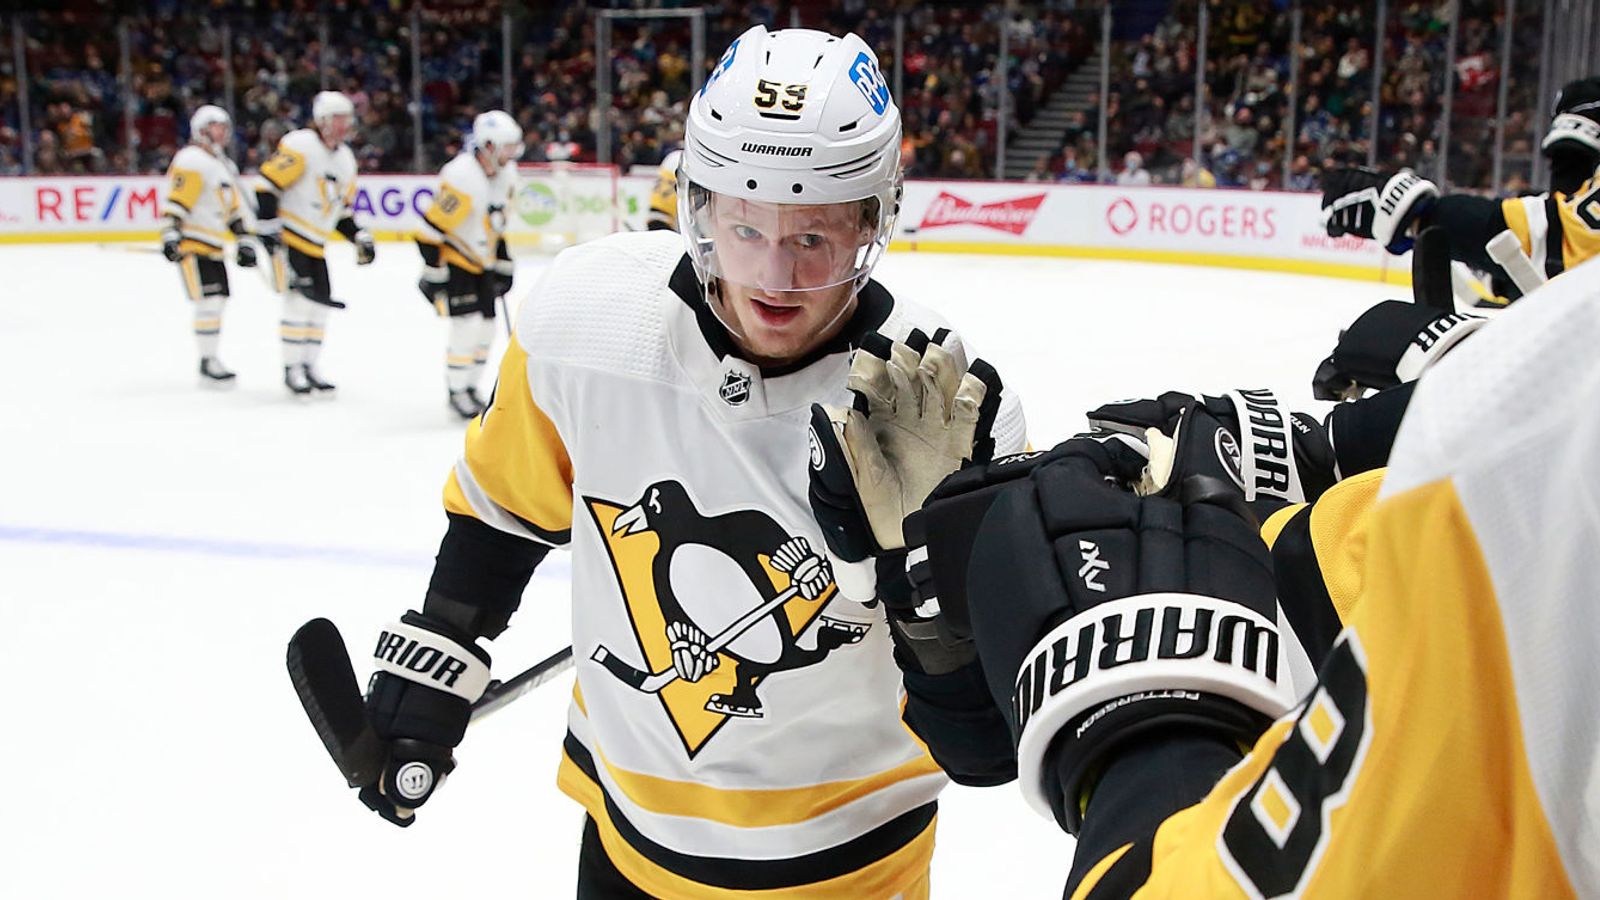 Penguins' Jan. 14 game time changed to avoid Steelers playoff conflict